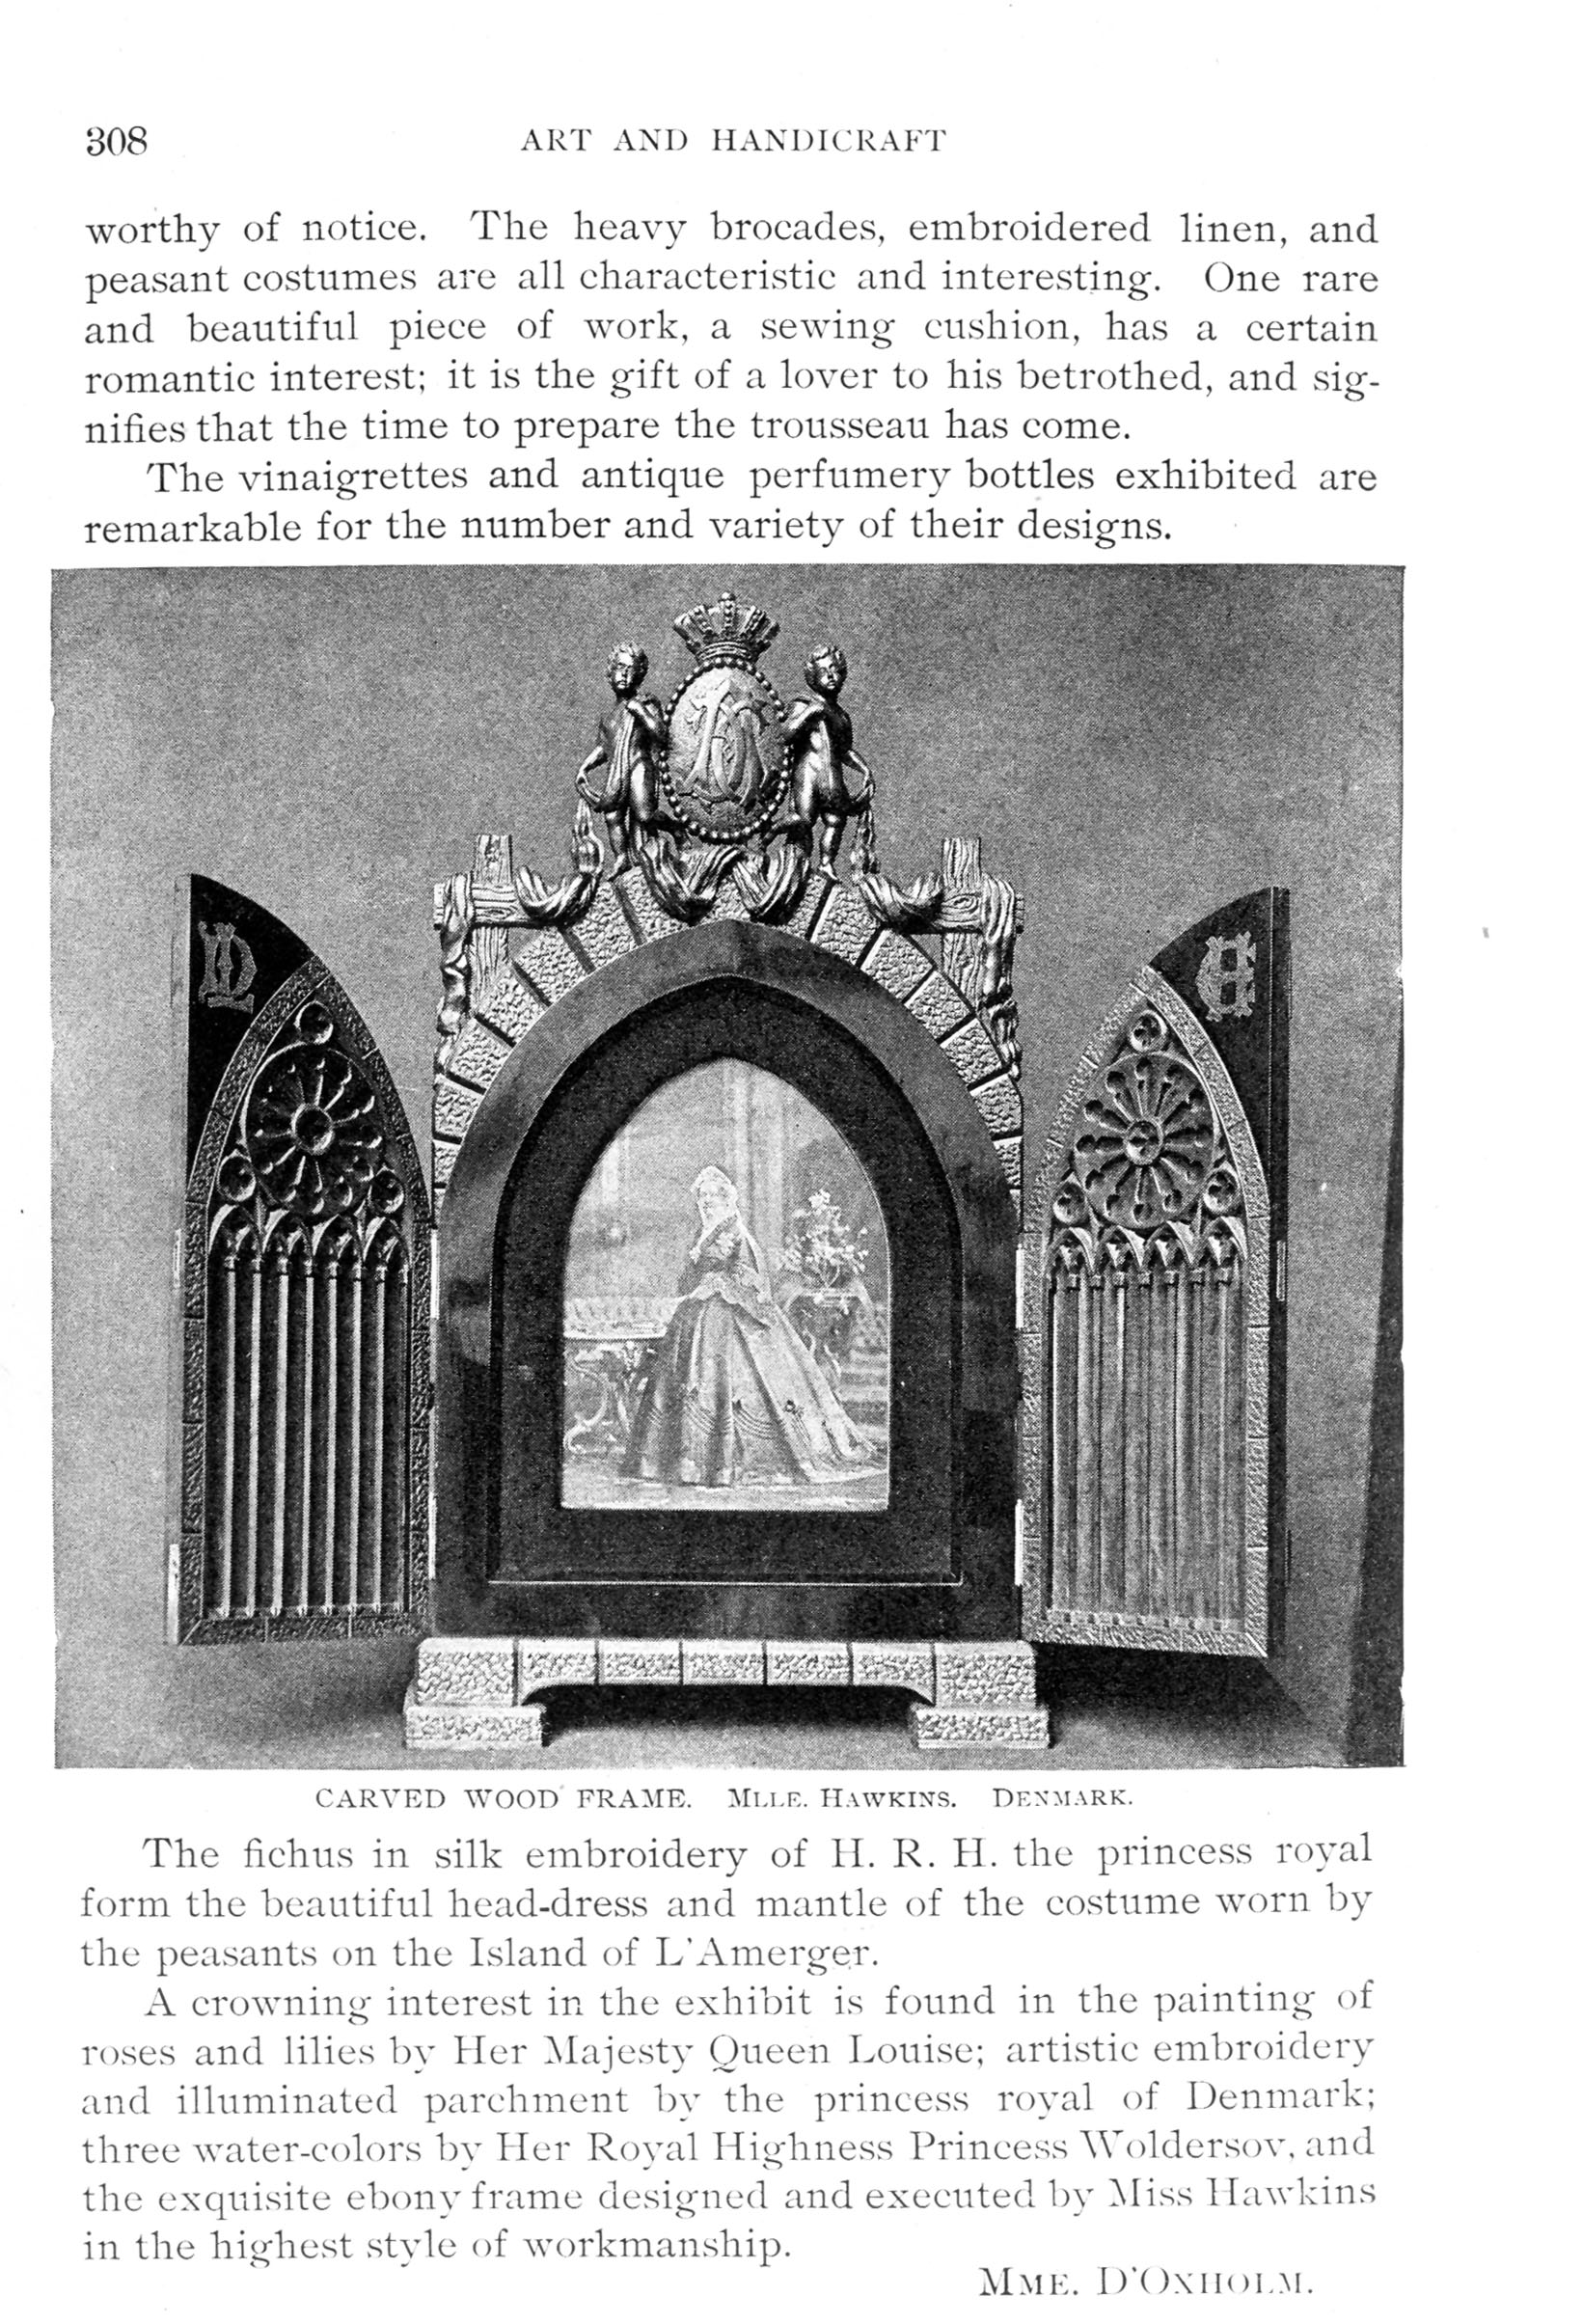 arched intricately carved frame with doors decorated with gothic windows, portrait of woman in frame